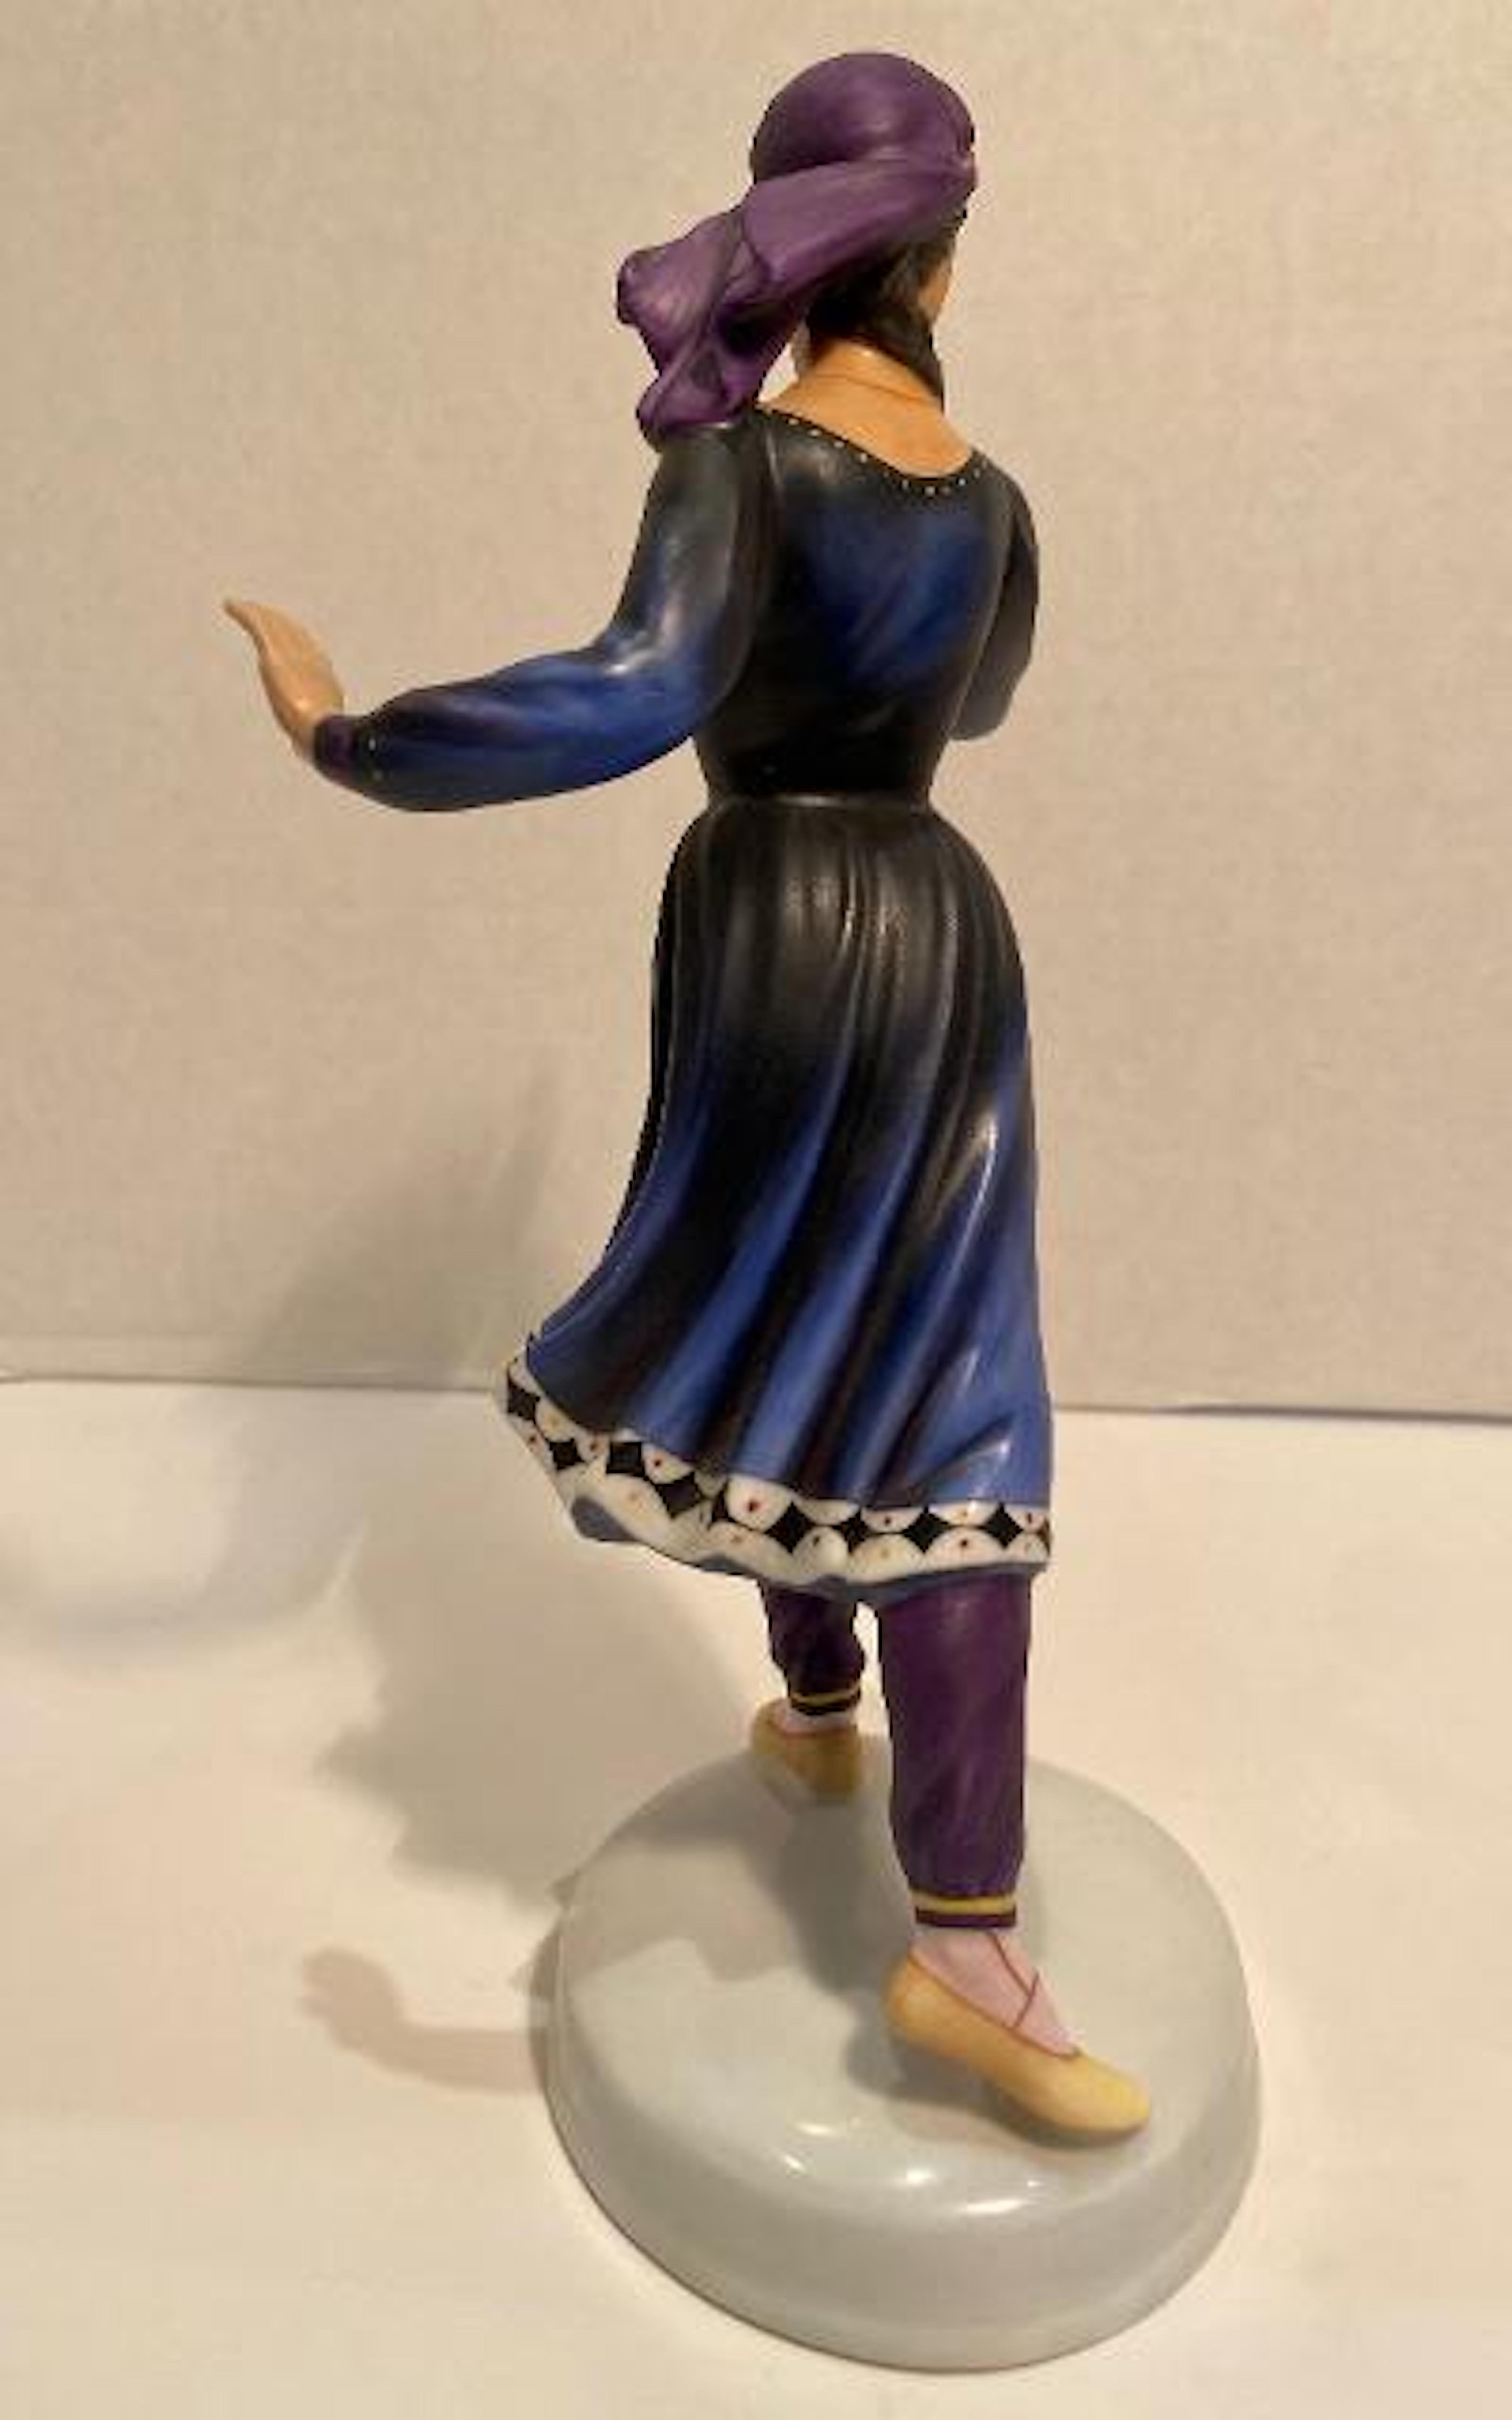 Hand-Painted Royal Doulton “Dancers of the World Kurdish Dancer” Limited Edition Figurine For Sale